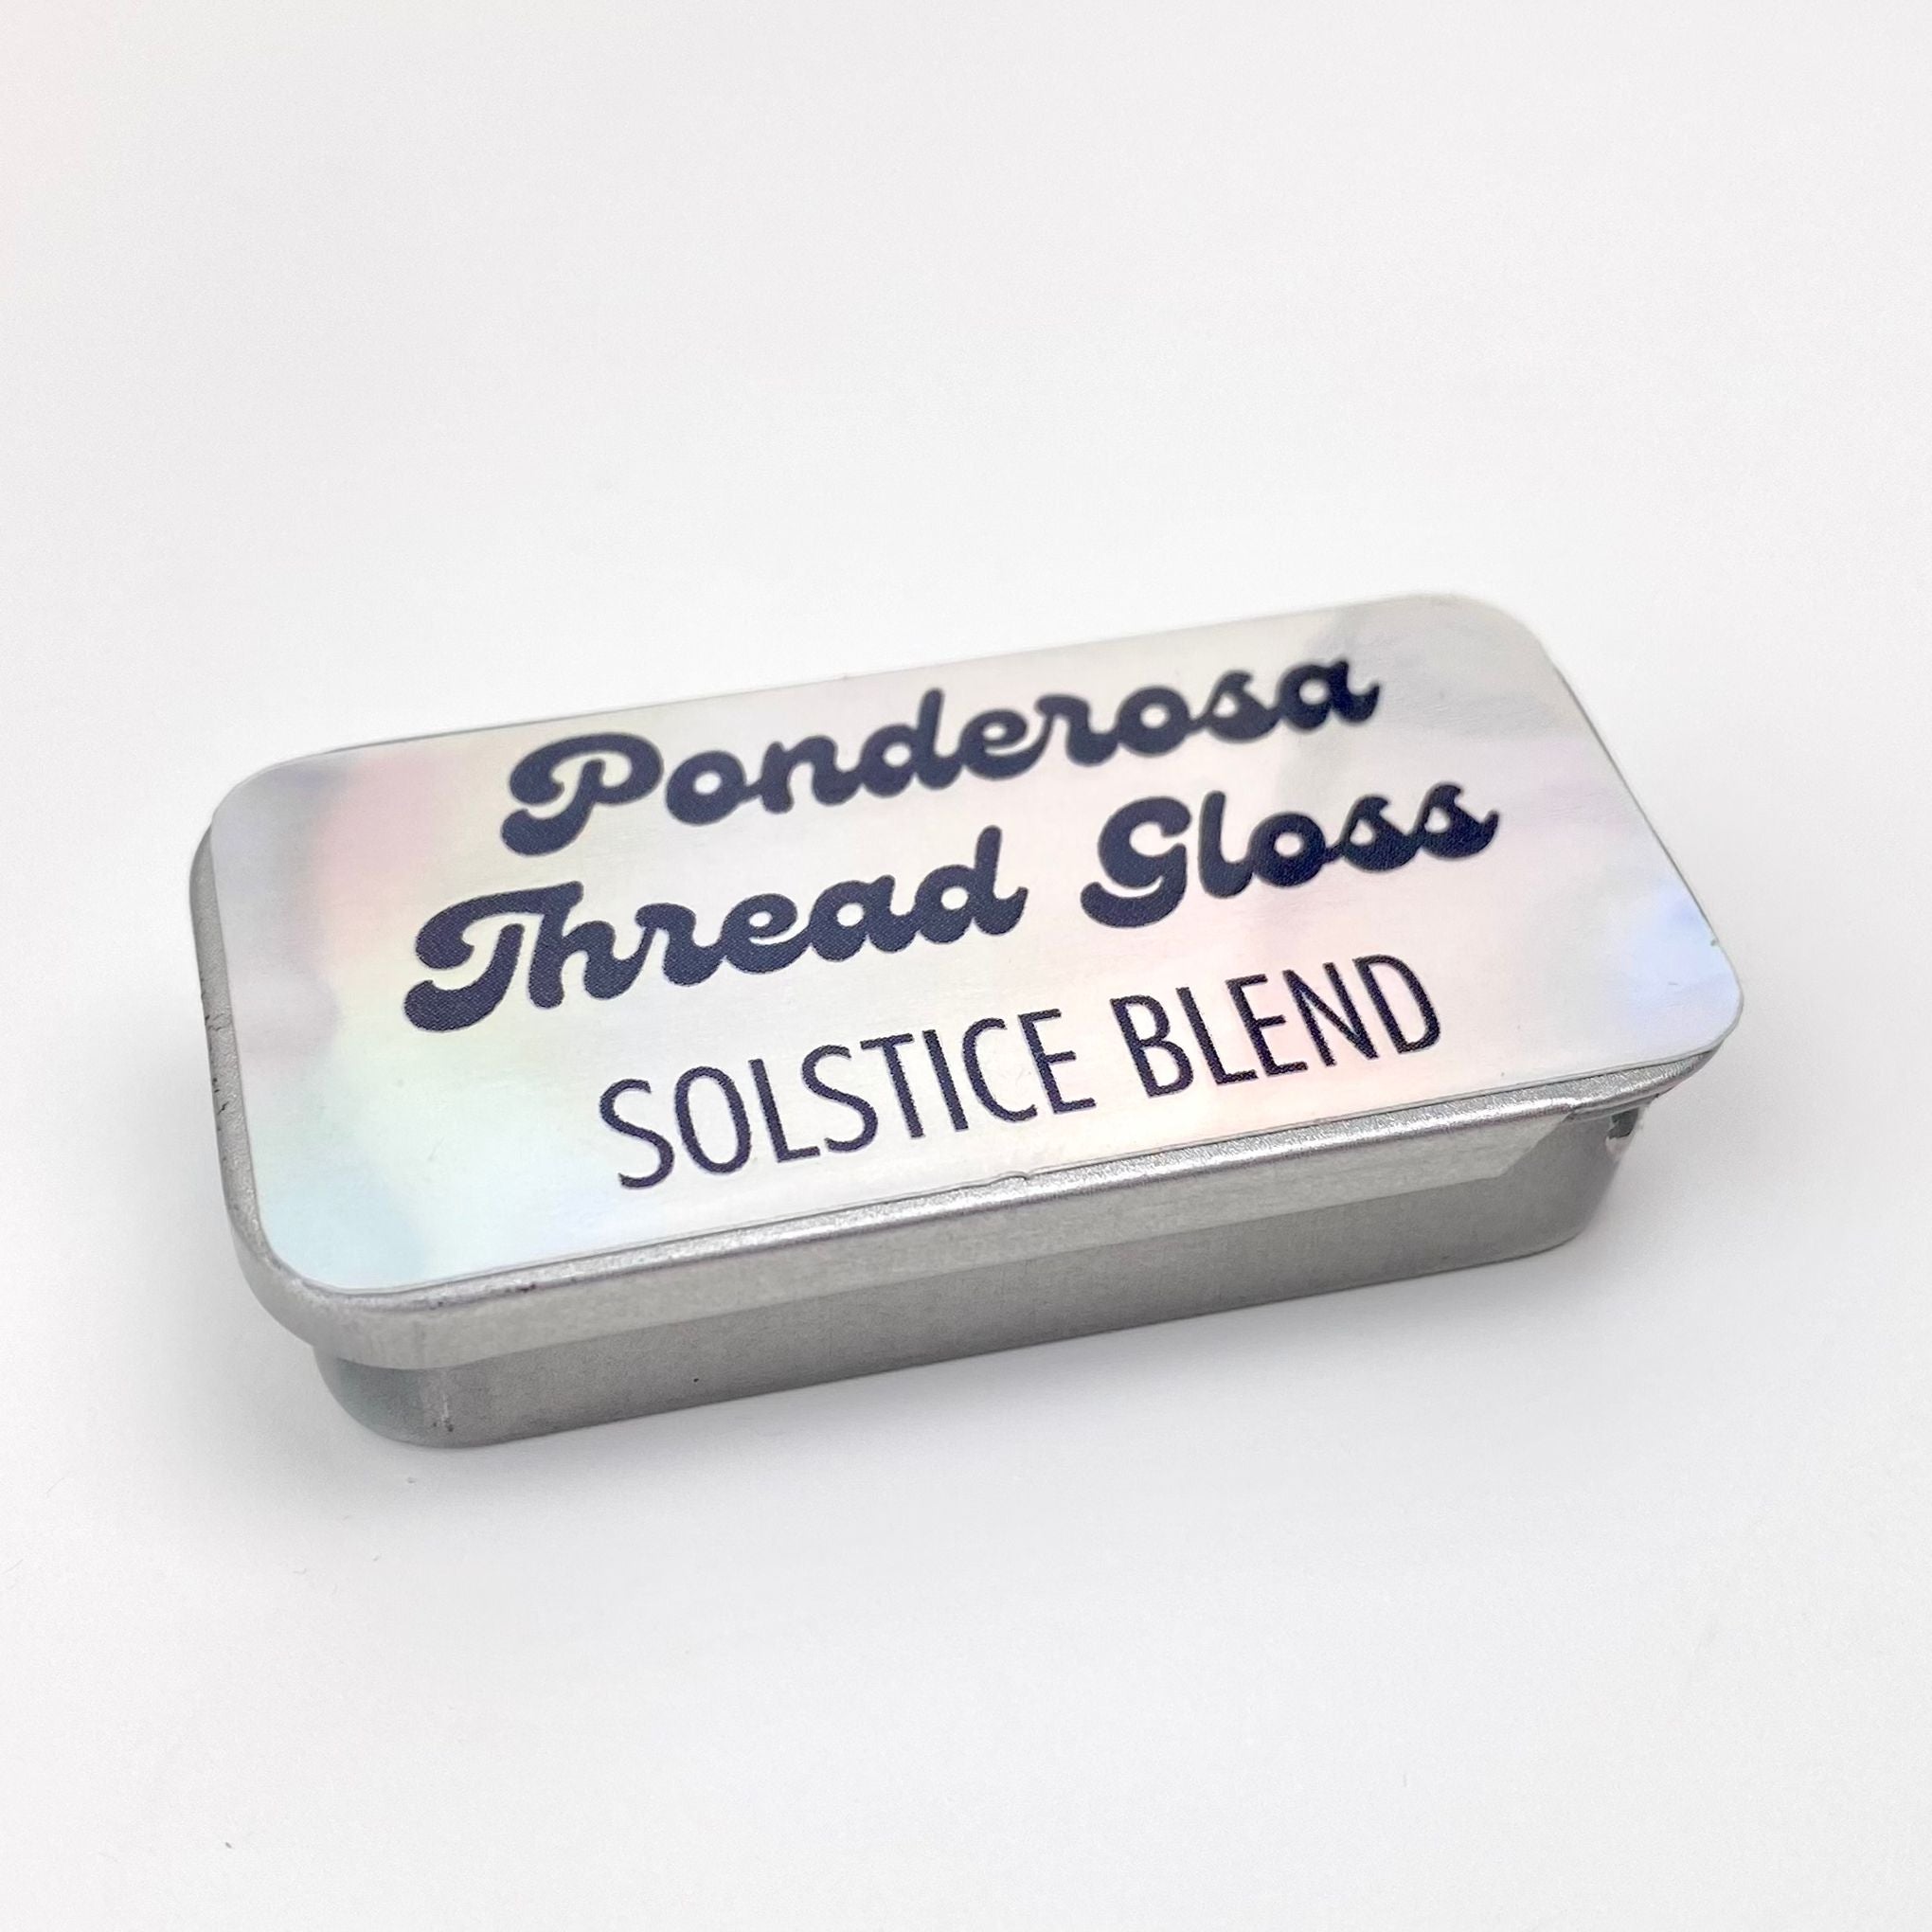 Ponderosa Creative-Solstice Blend Thread Gloss-sewing notion-gather here online